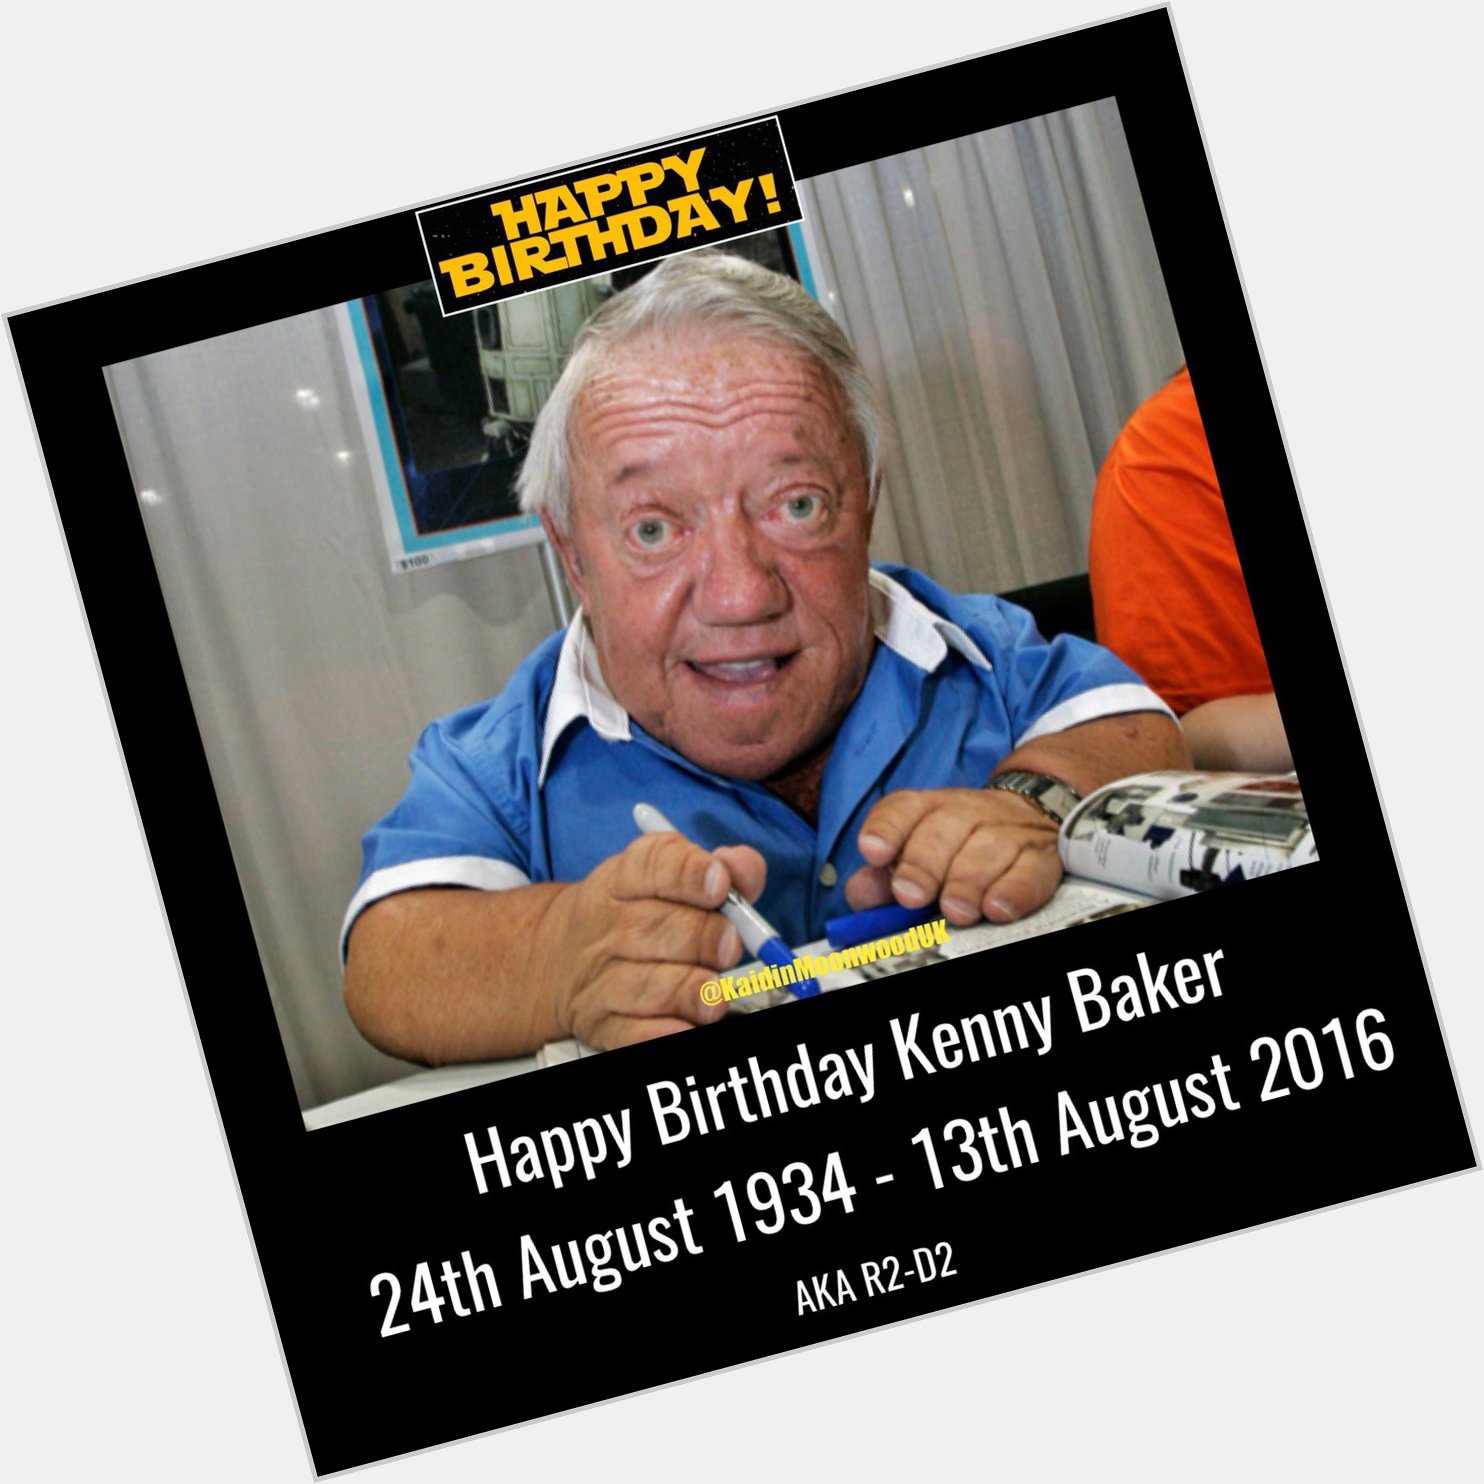 Happy Birthday Kenny Baker aka R2-D2. 24th August 1934 to 13th August 2016.   